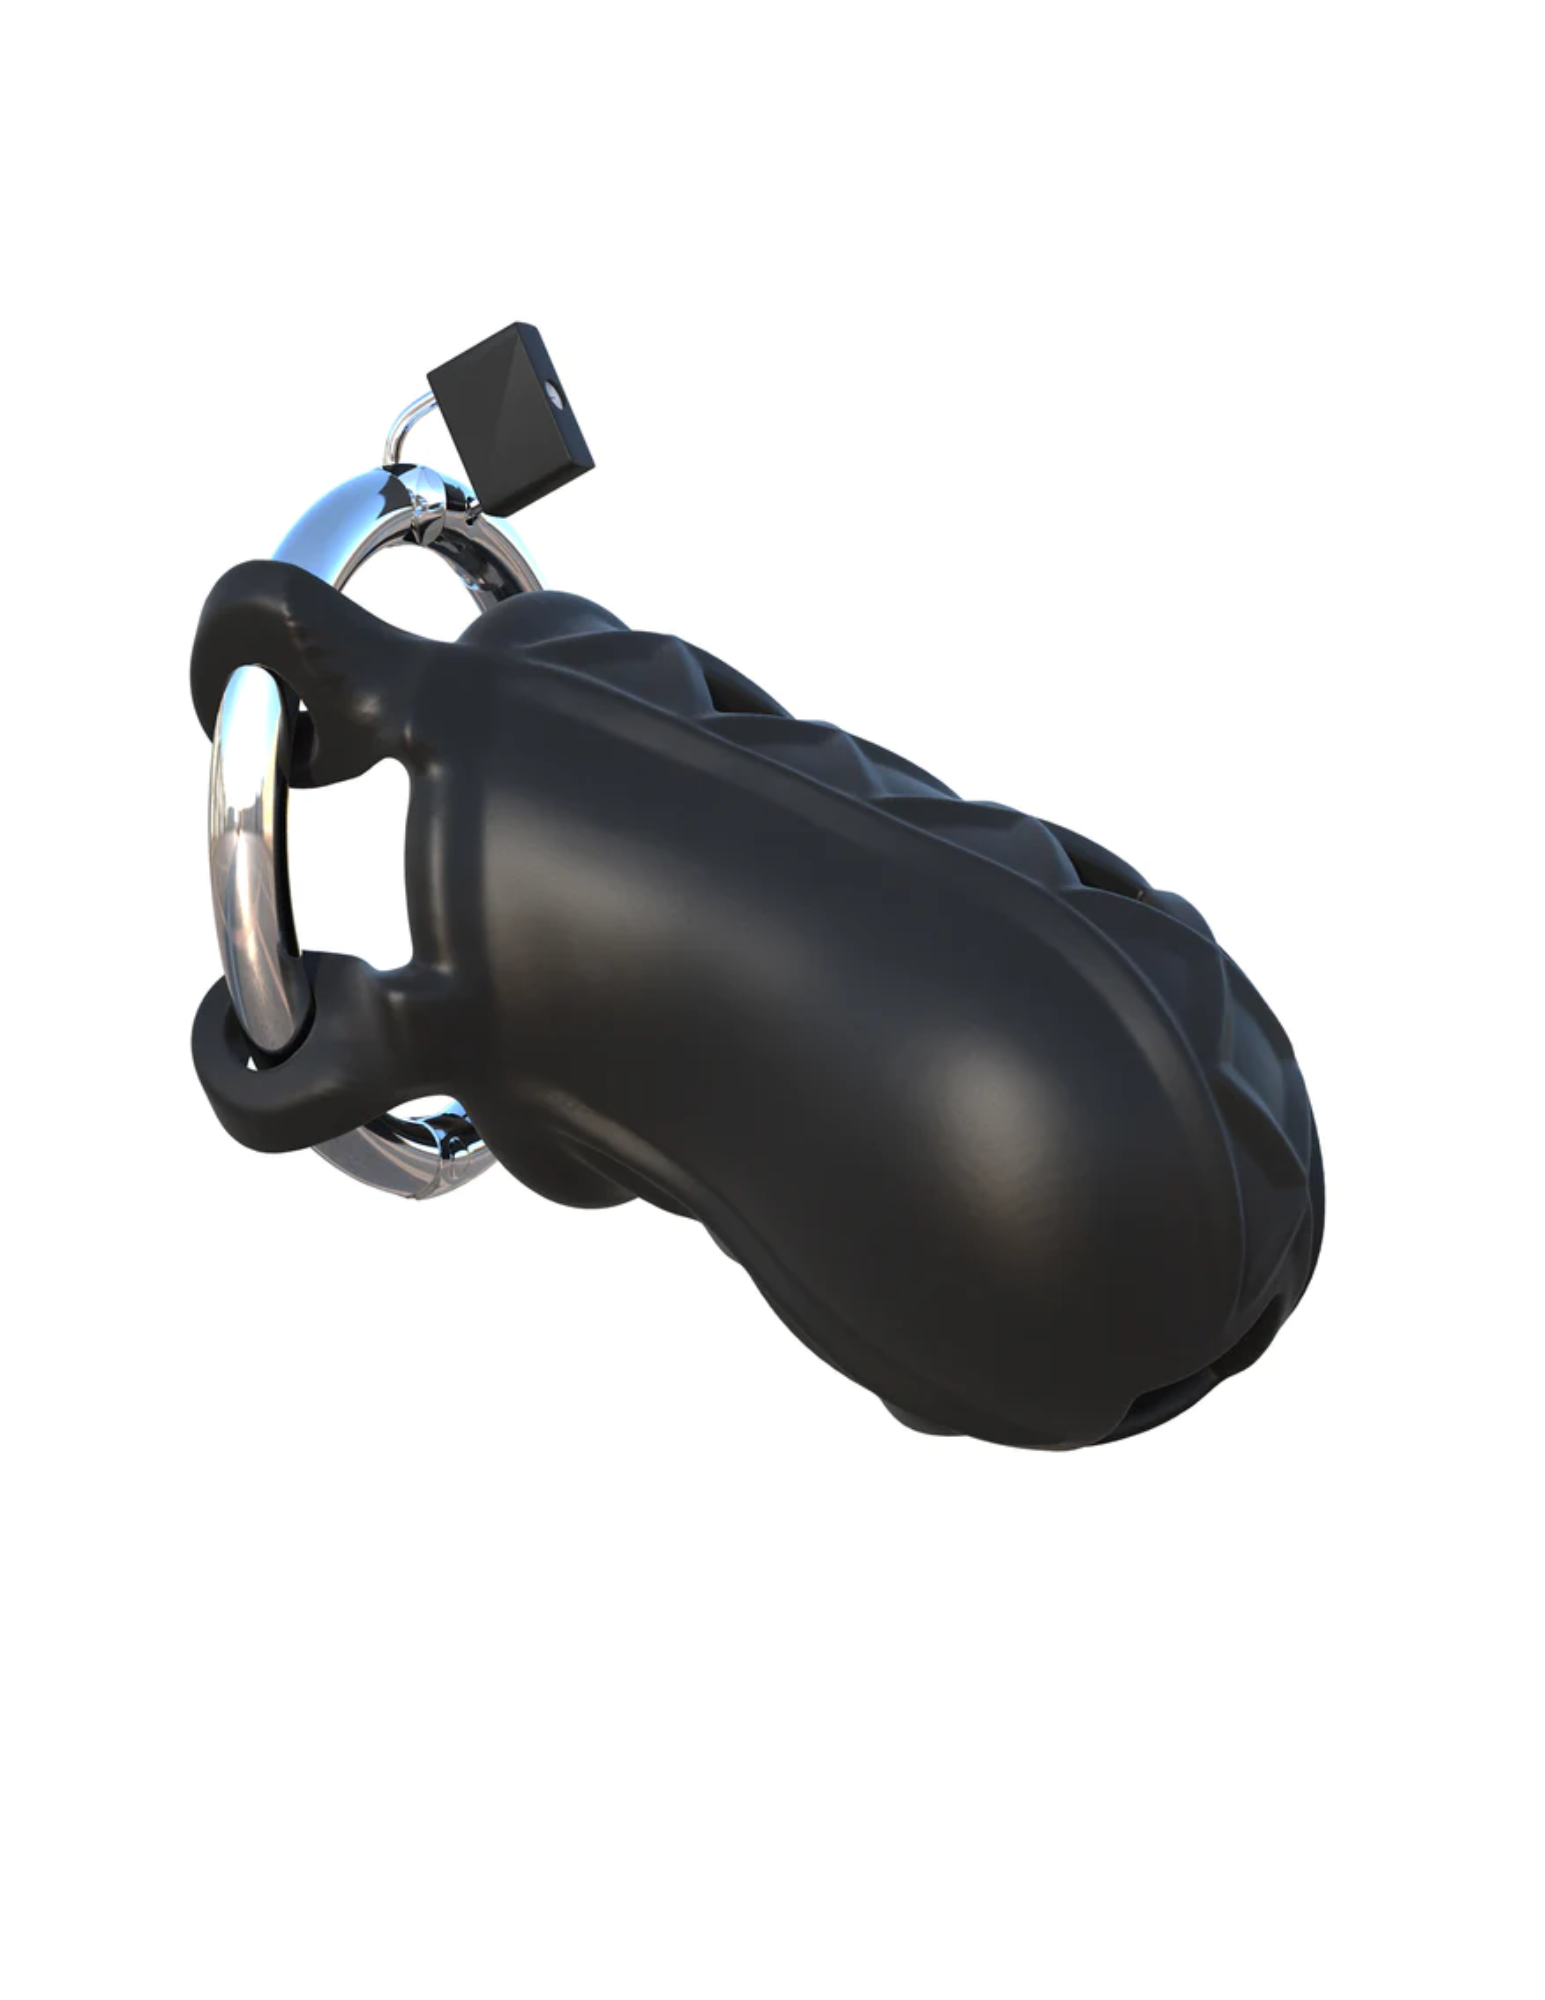 Side view of the Fantasy C-Ringz Extreme Silicone Cock Blocker from Pipedreams (black) shows its chastity style hardware and textured silicone sleeve.